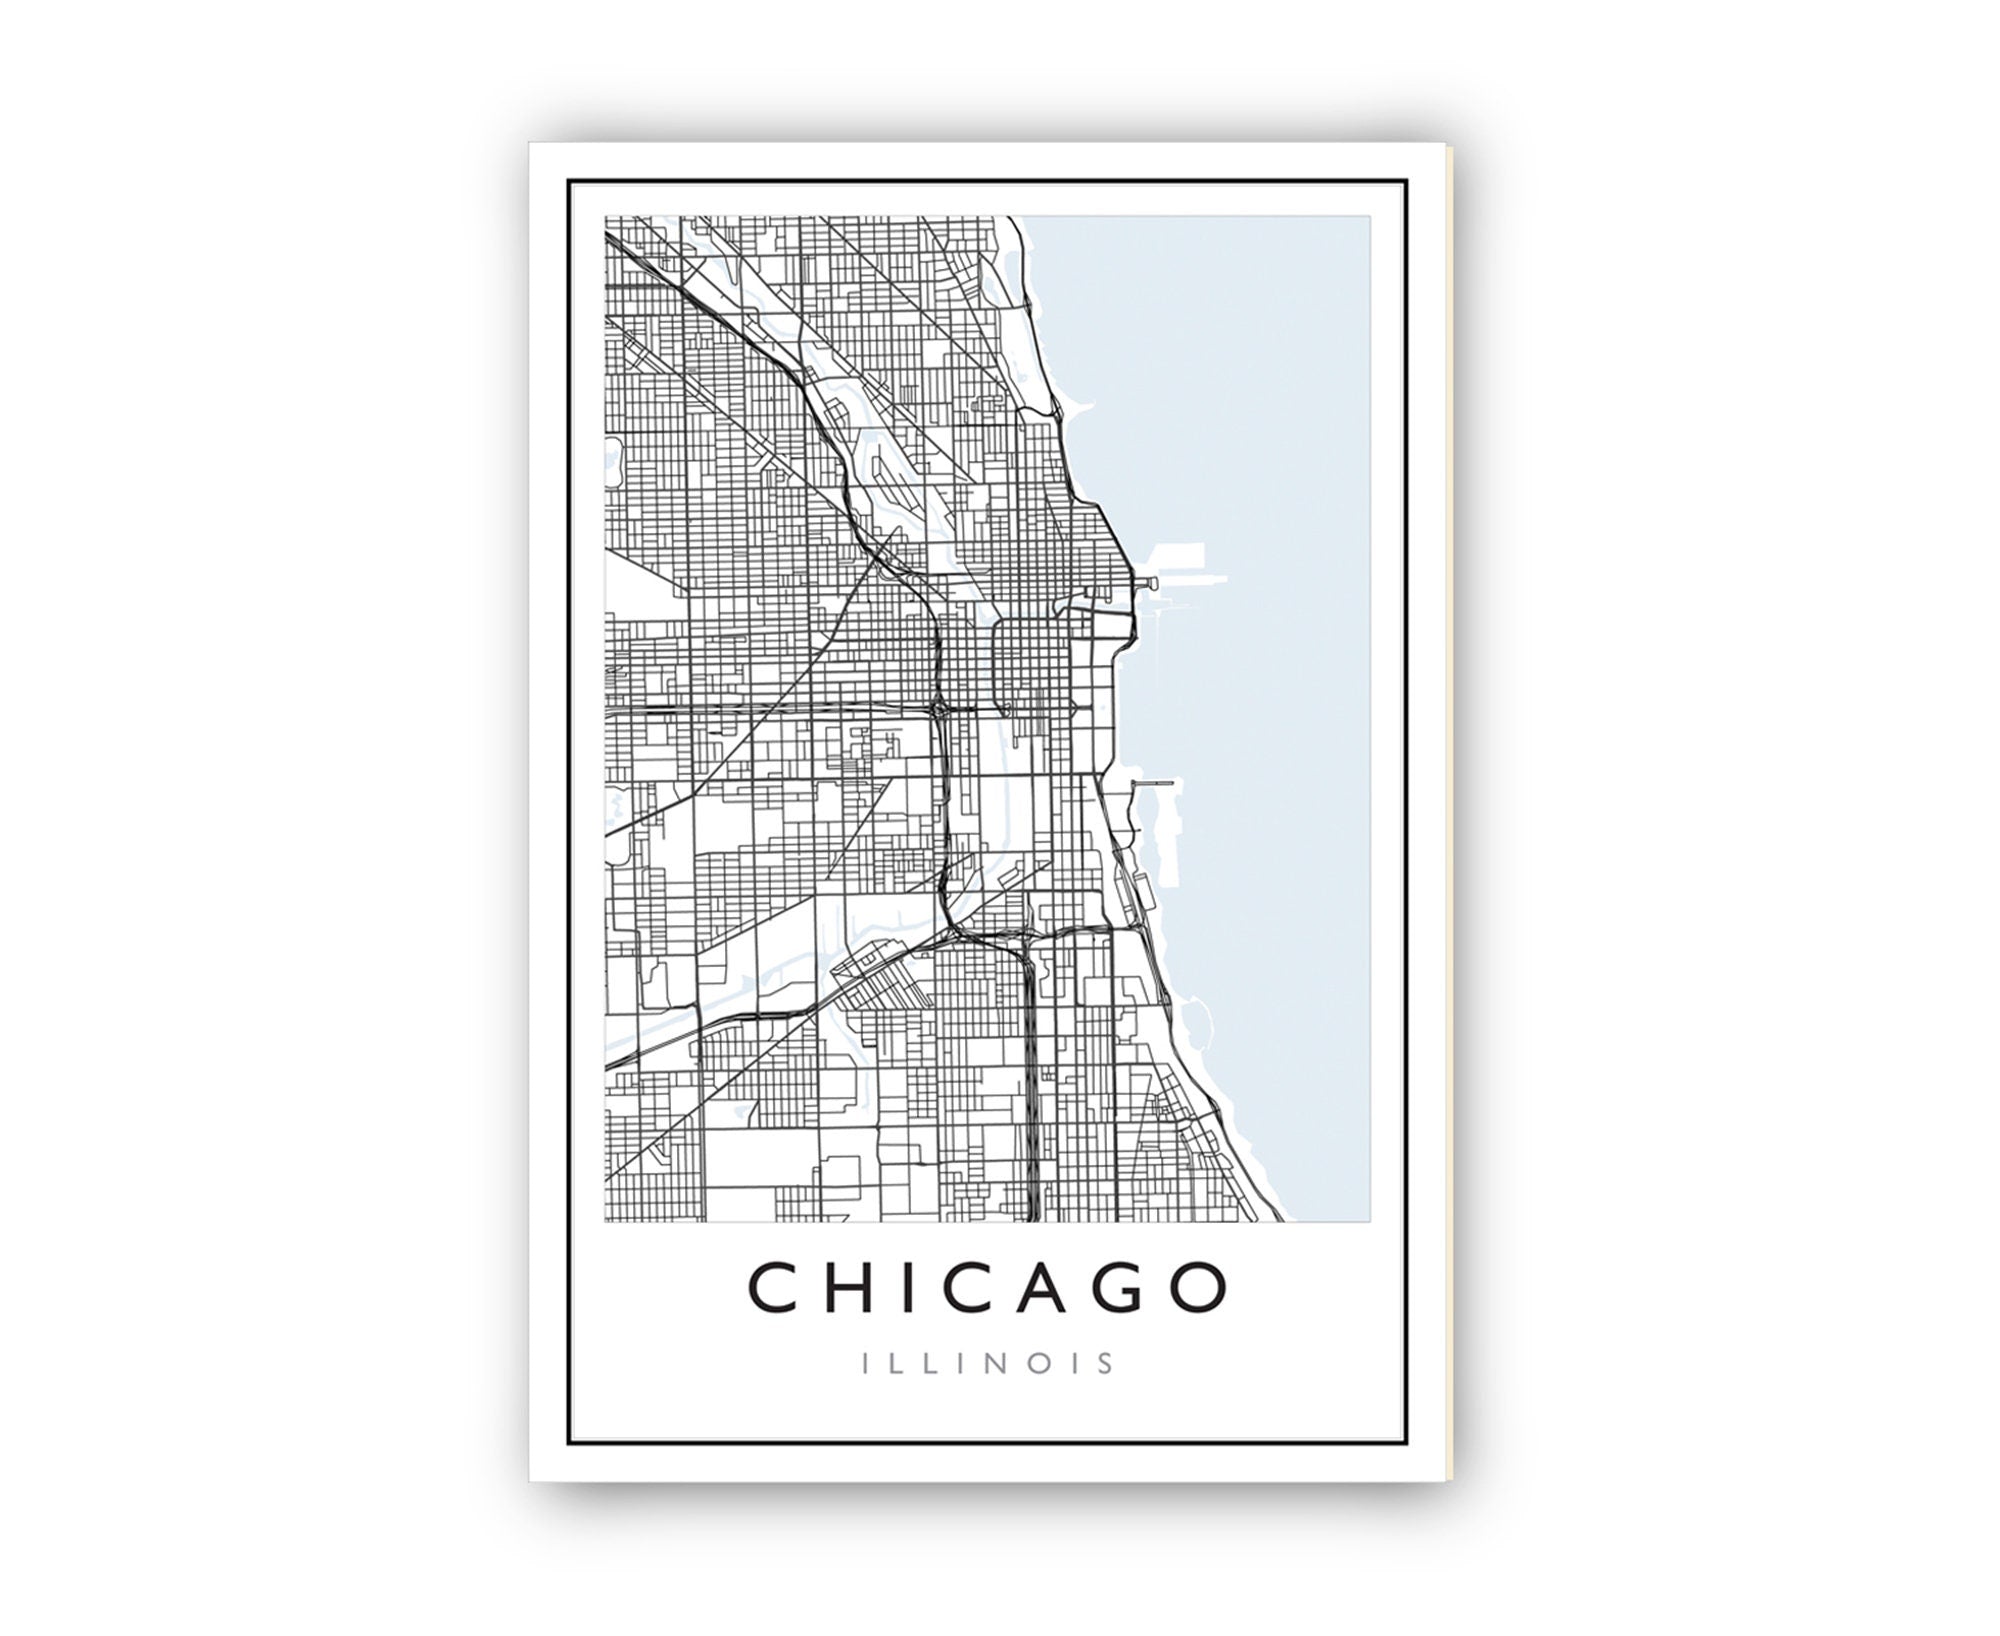 Chicago City Map, Chicago City Road Map Poster, Chicago Illinois City Street Map, Modern US City Map, Home Art Decor, Office Wall Art Print